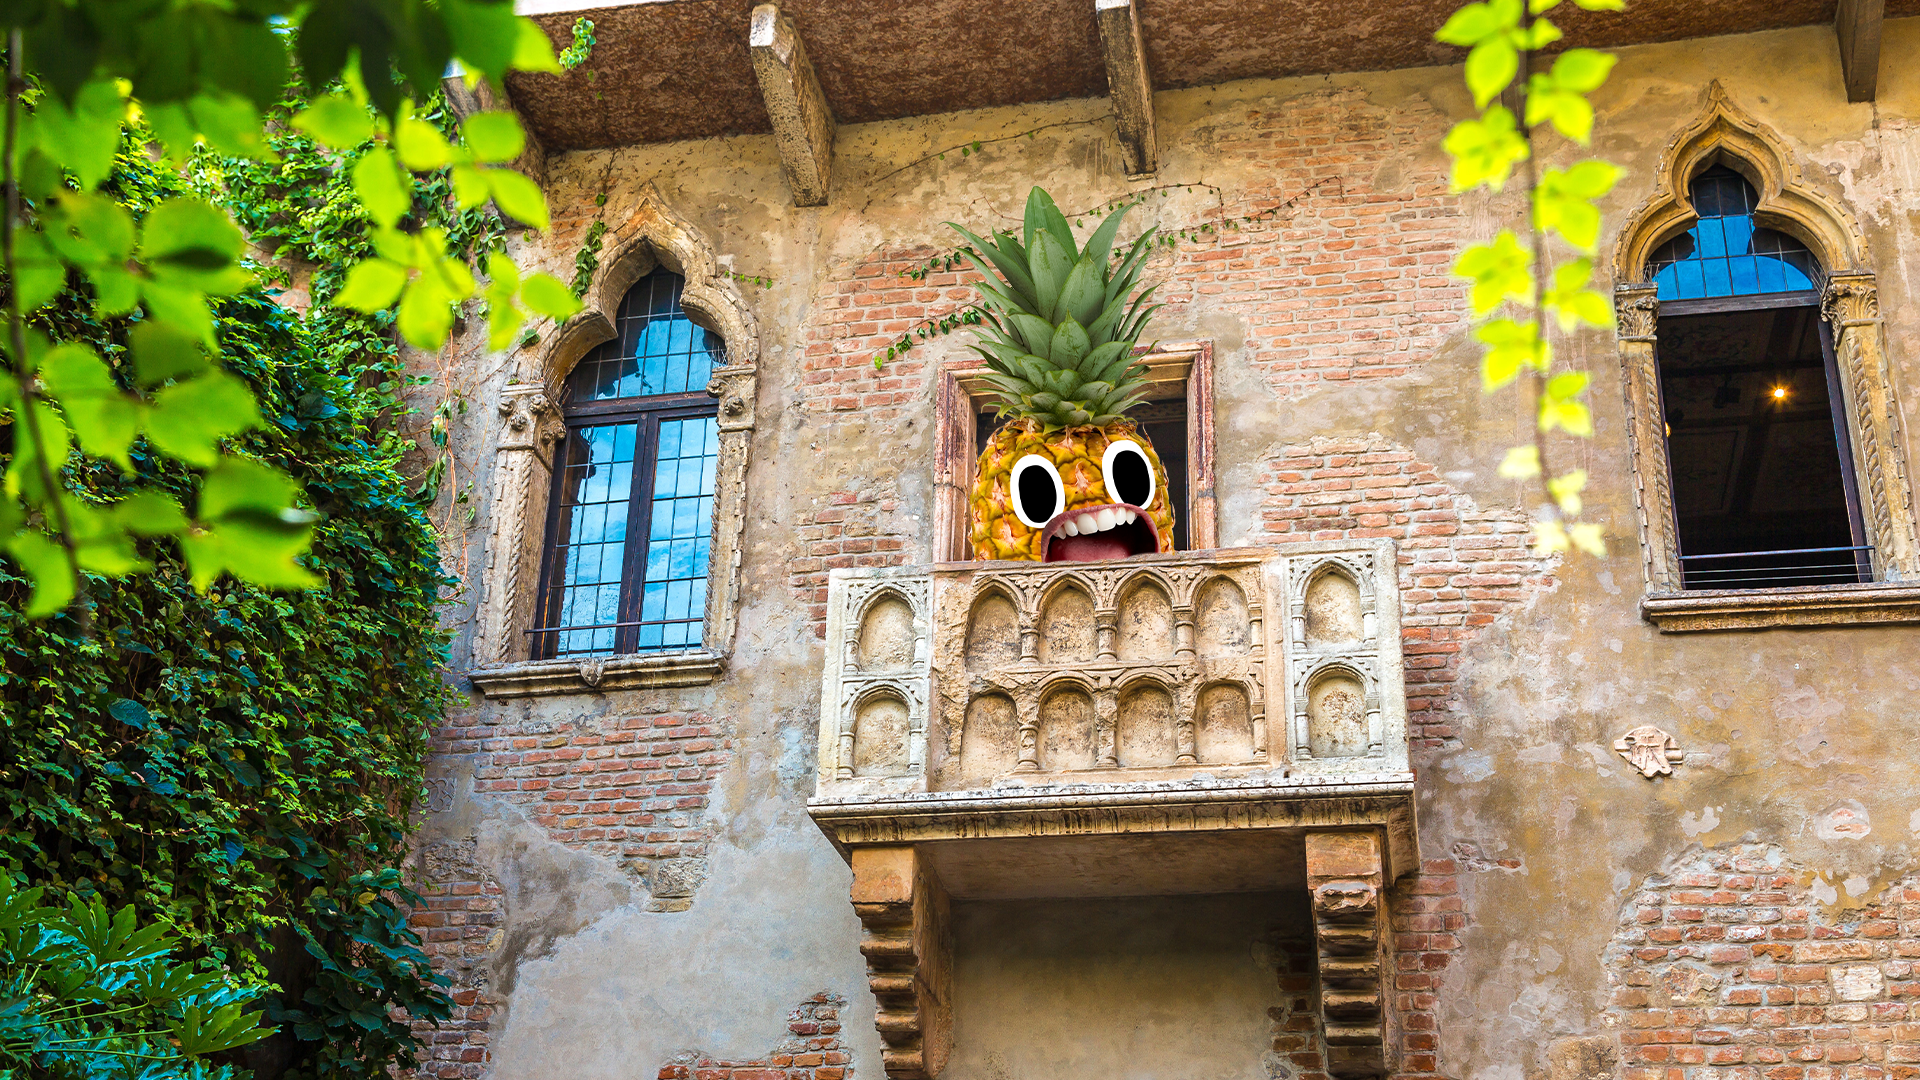 A pineapple recreates the balcony scene from Romeo and Juliet